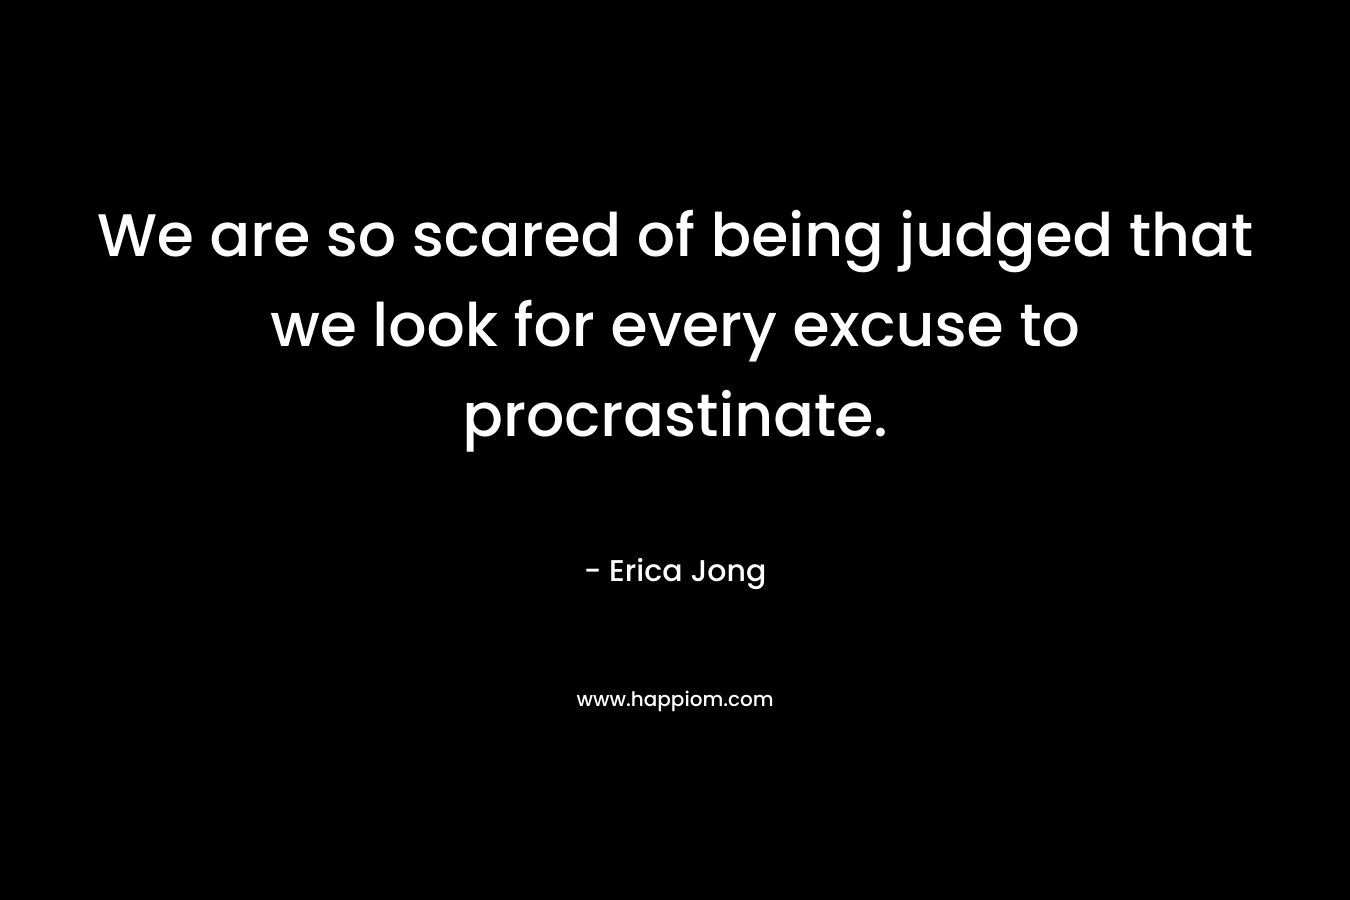 We are so scared of being judged that we look for every excuse to procrastinate. – Erica Jong